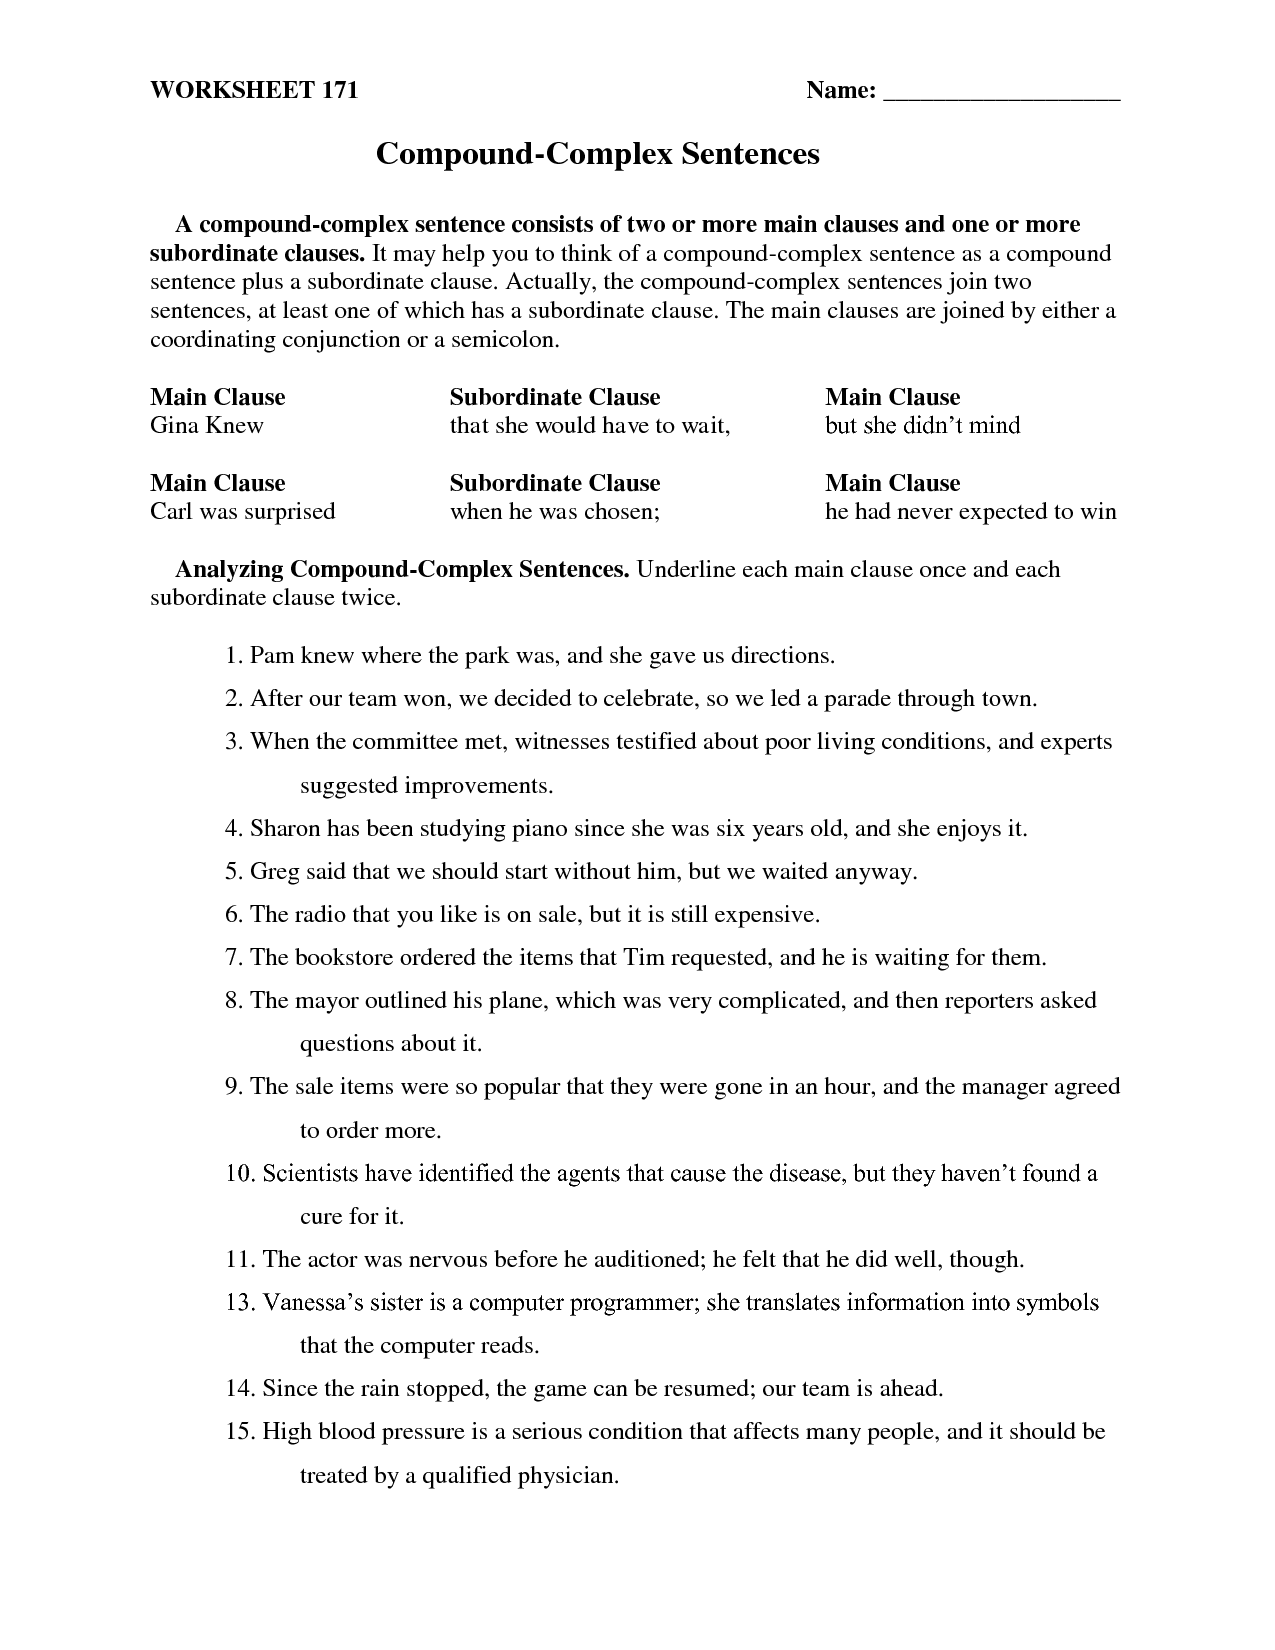 13-best-images-of-simple-and-compound-sentences-worksheets-simple-compound-complex-sentence